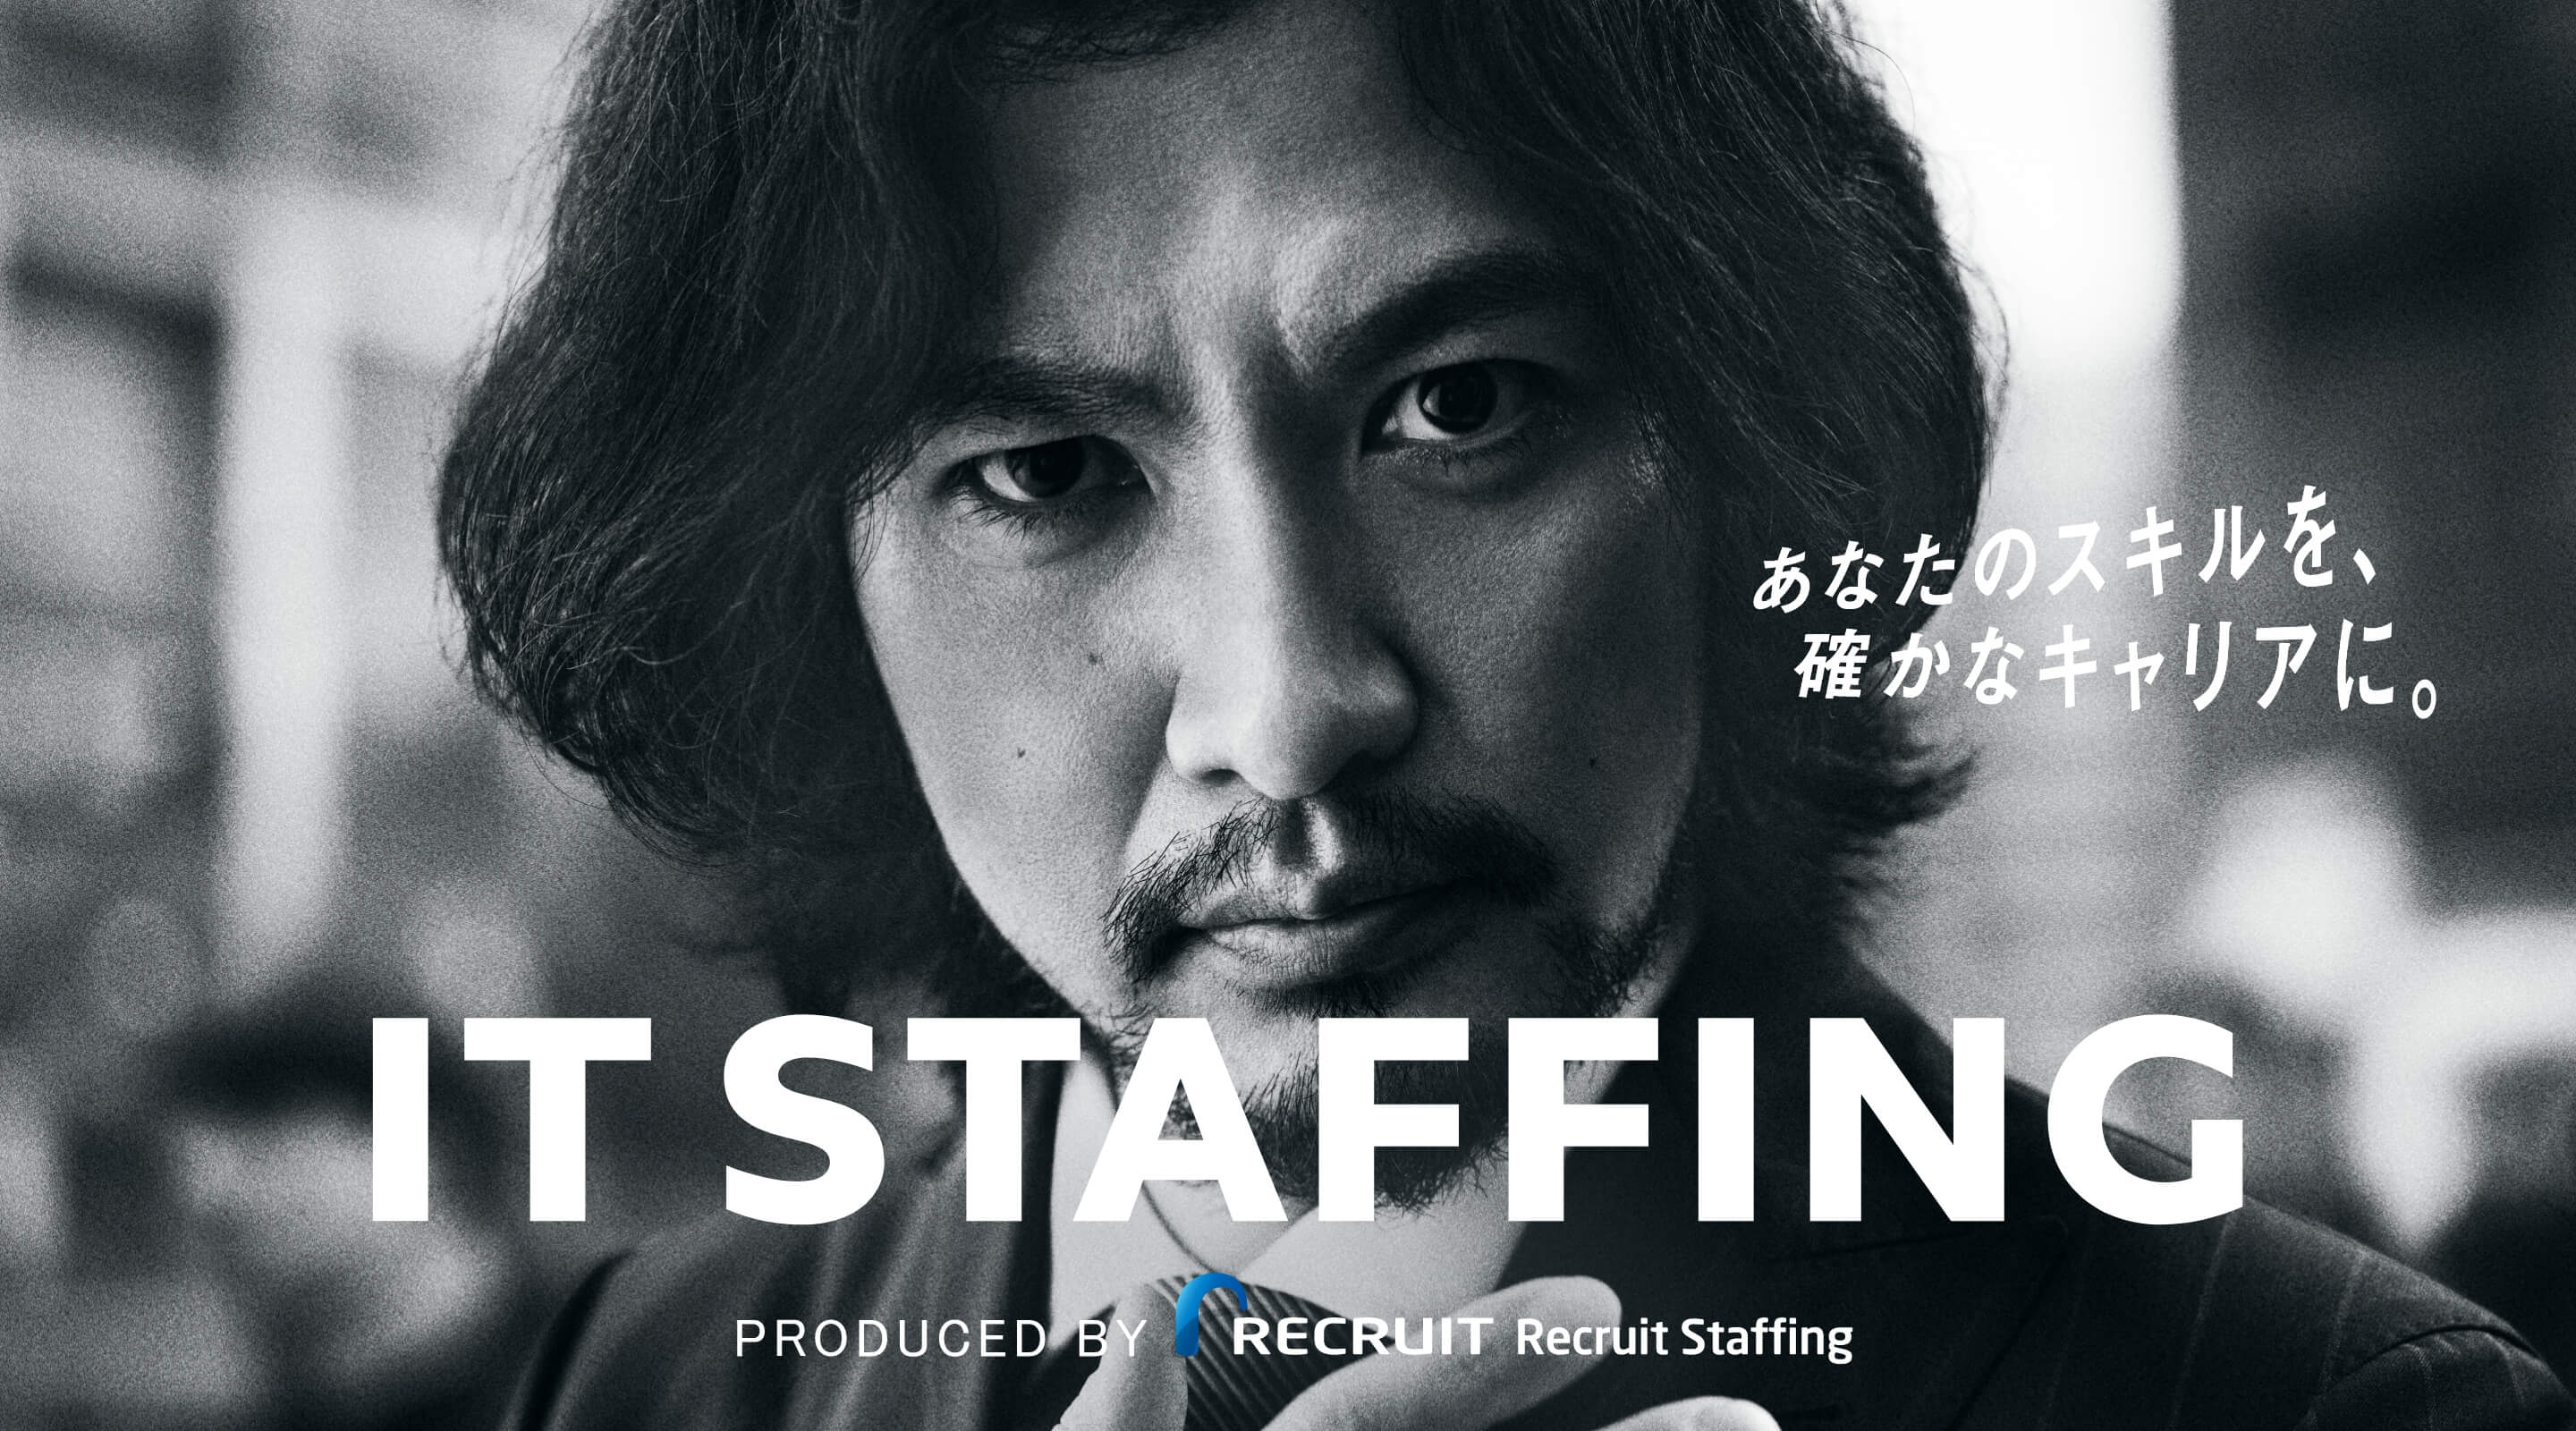 IT STAFFING PRODUCED BY RECRUIT Recruit Staffing